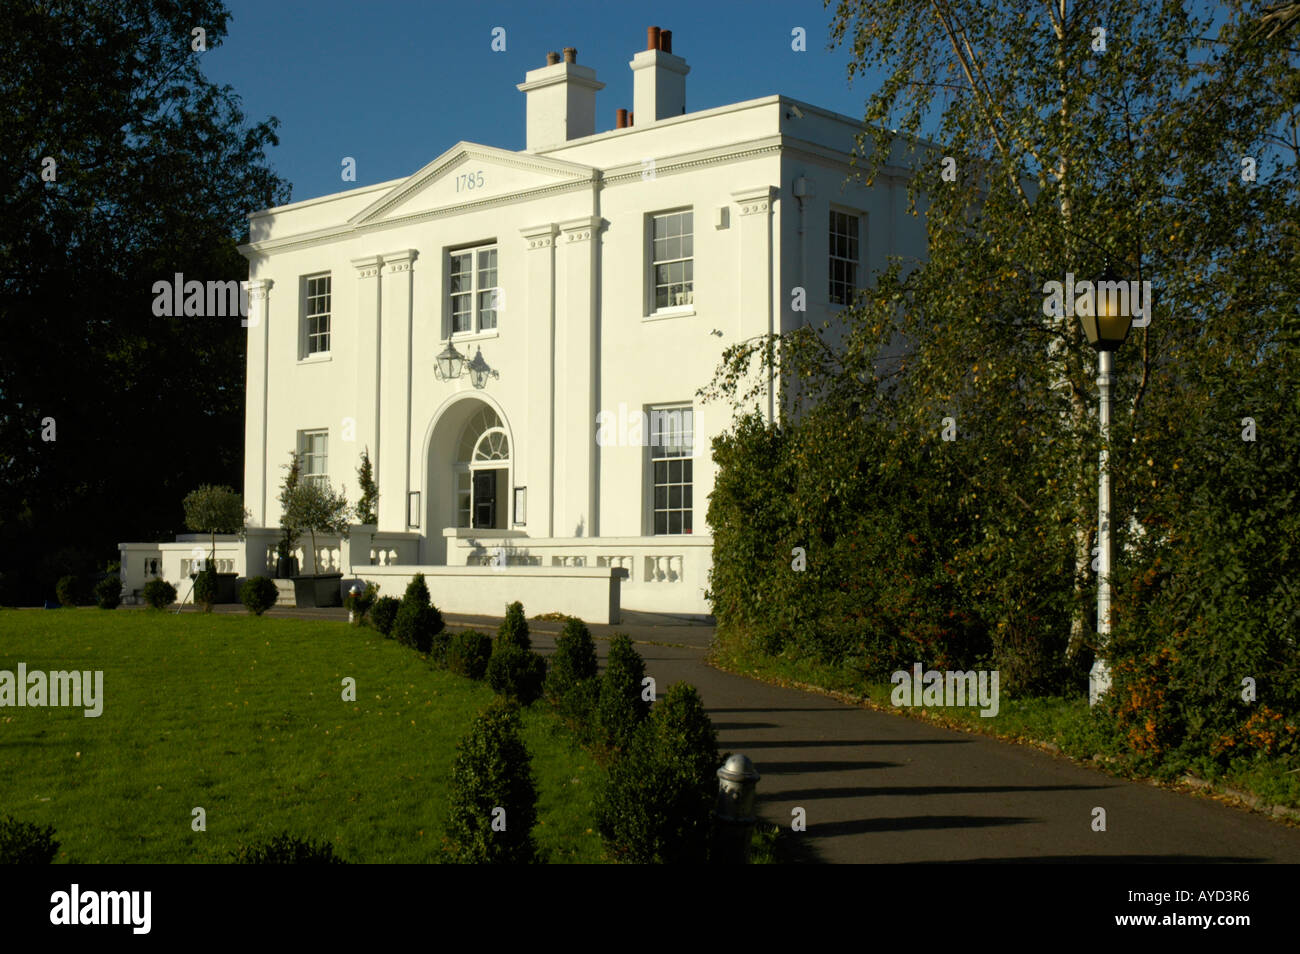 Belair House in Belair Park Dulwich designed by John Files in 1785 London England Stock Photo